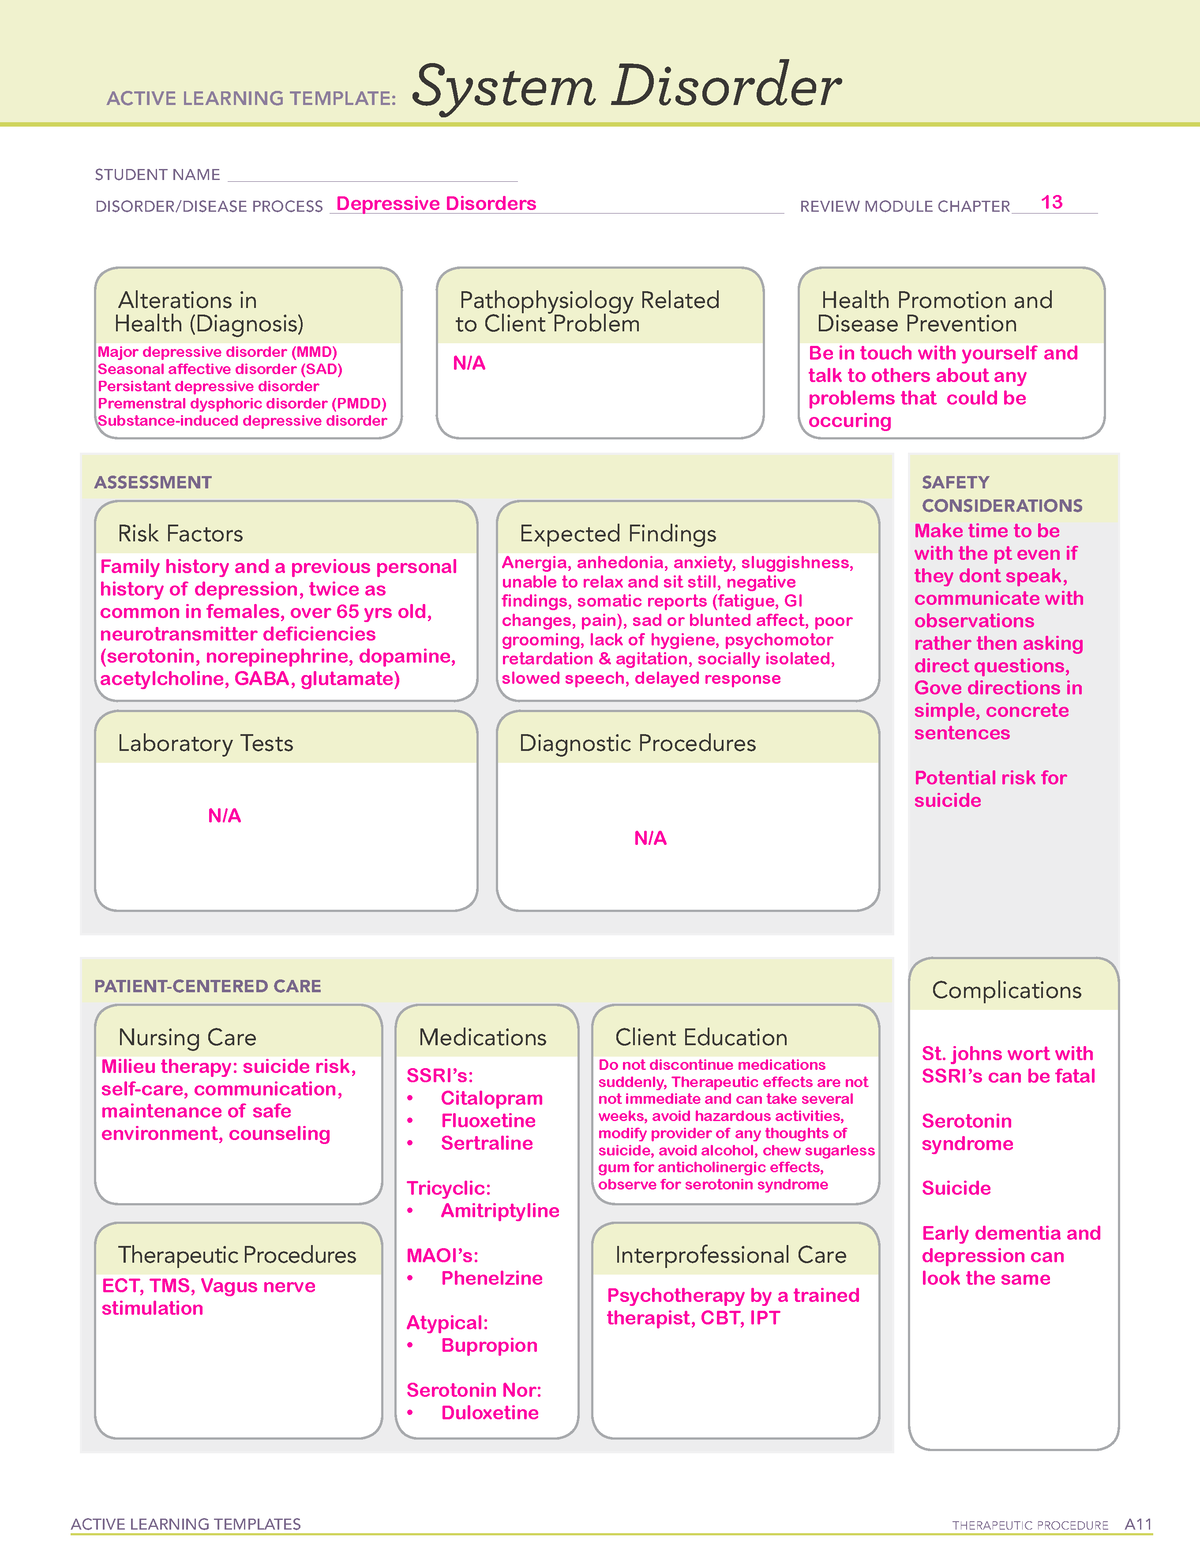 Depressive Disorders ATI Template ACTIVE LEARNING TEMPLATES